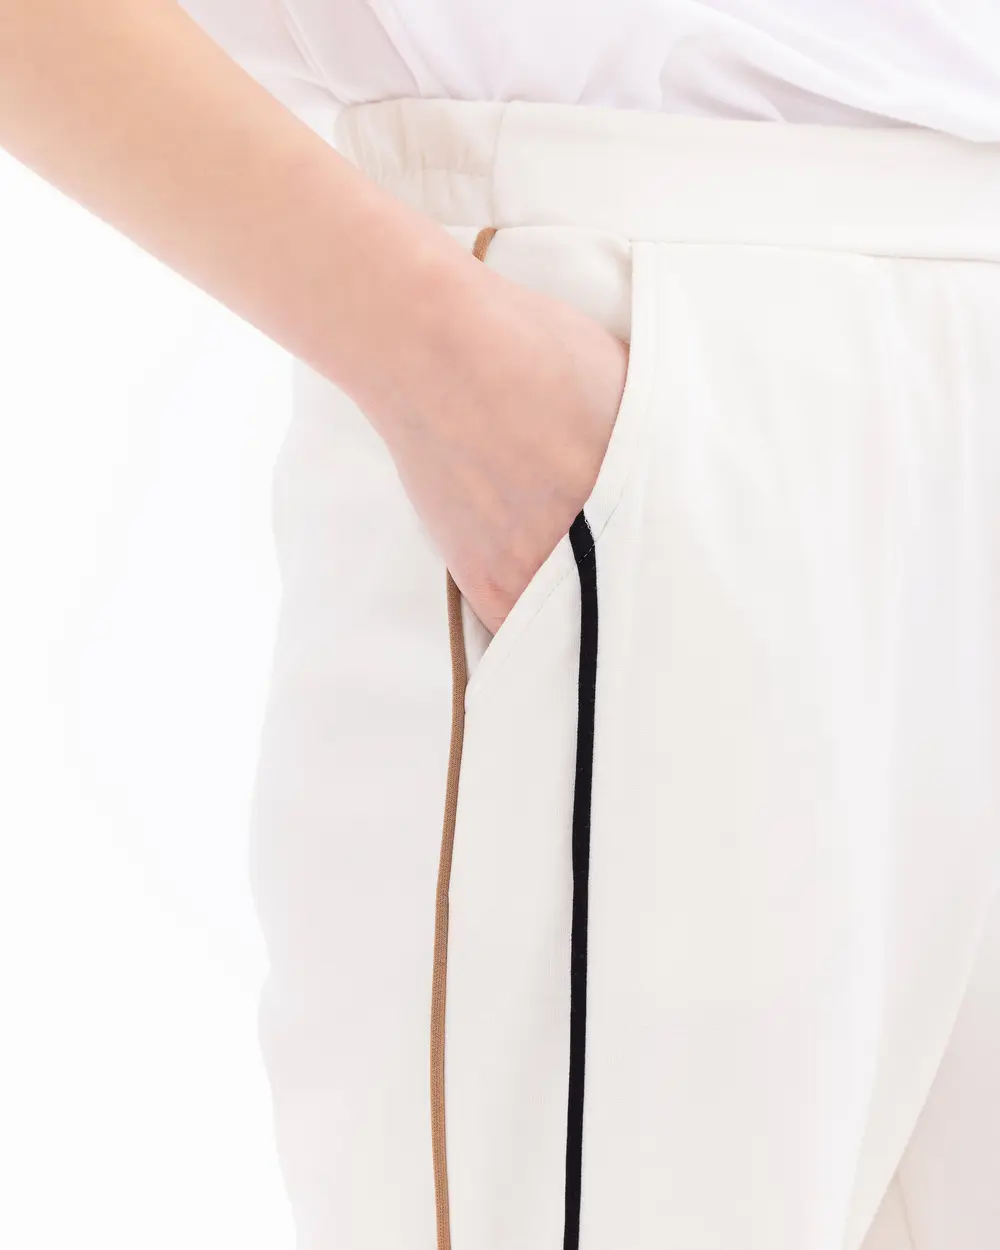 Elastic Waist Sweatpants with Piping Detail